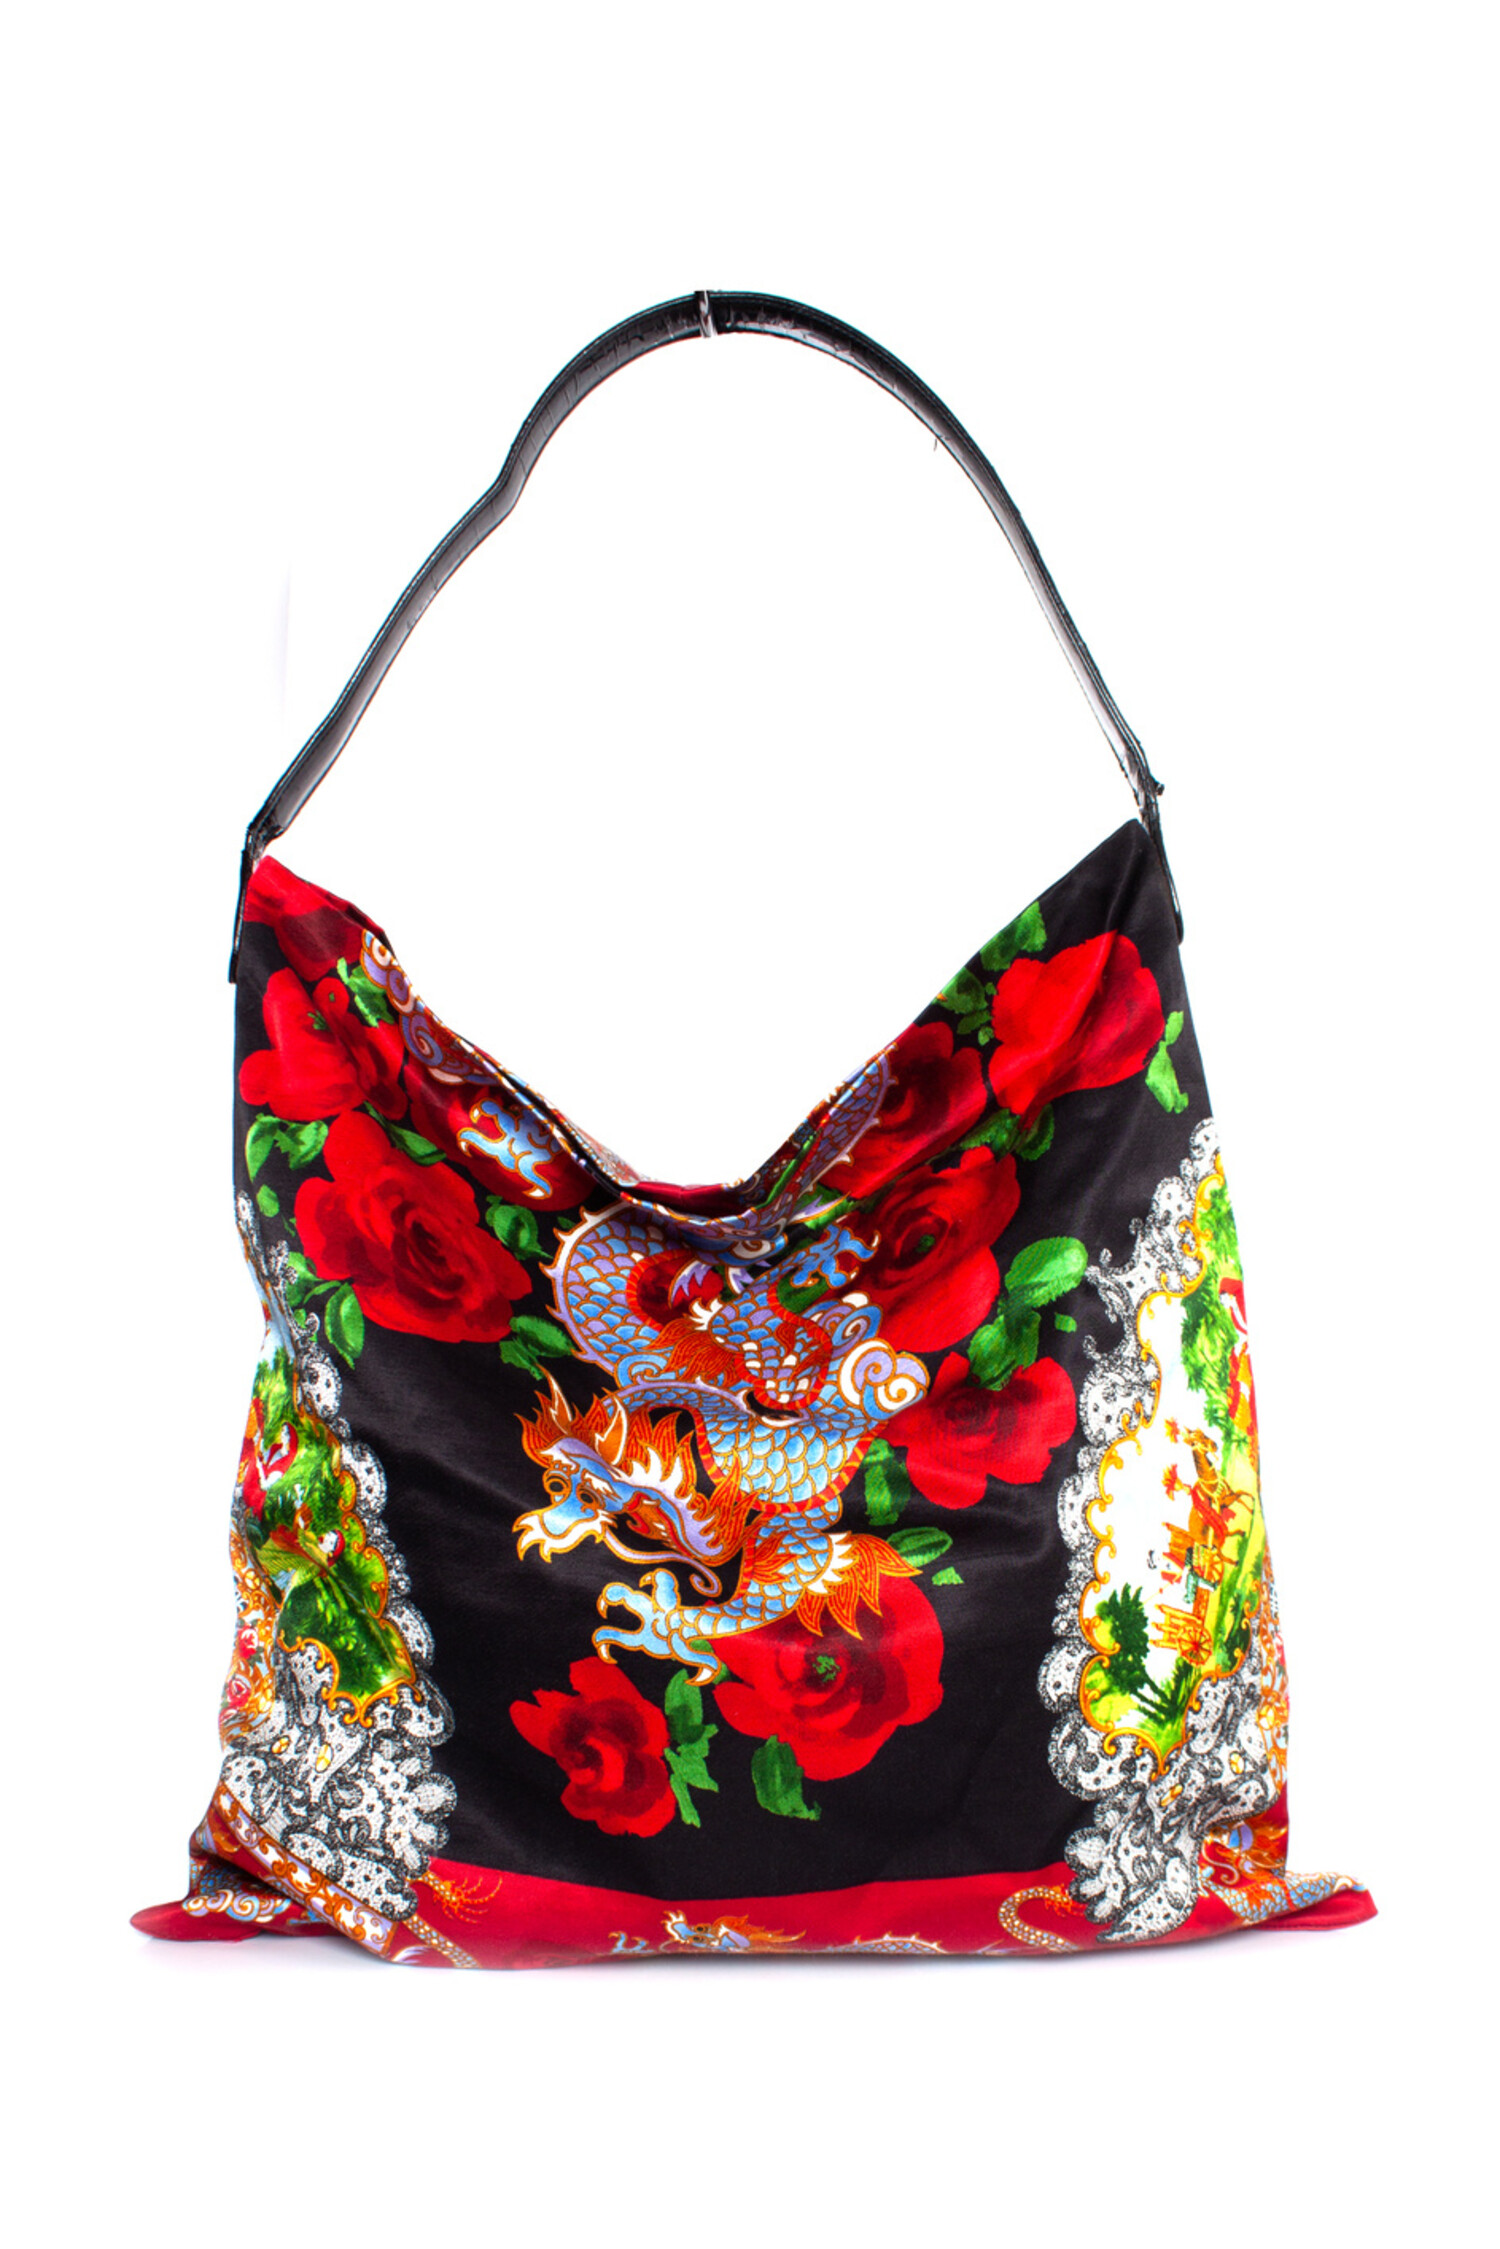 Dolce & Gabbana, Fabric tote bag with Chinese print - Unique